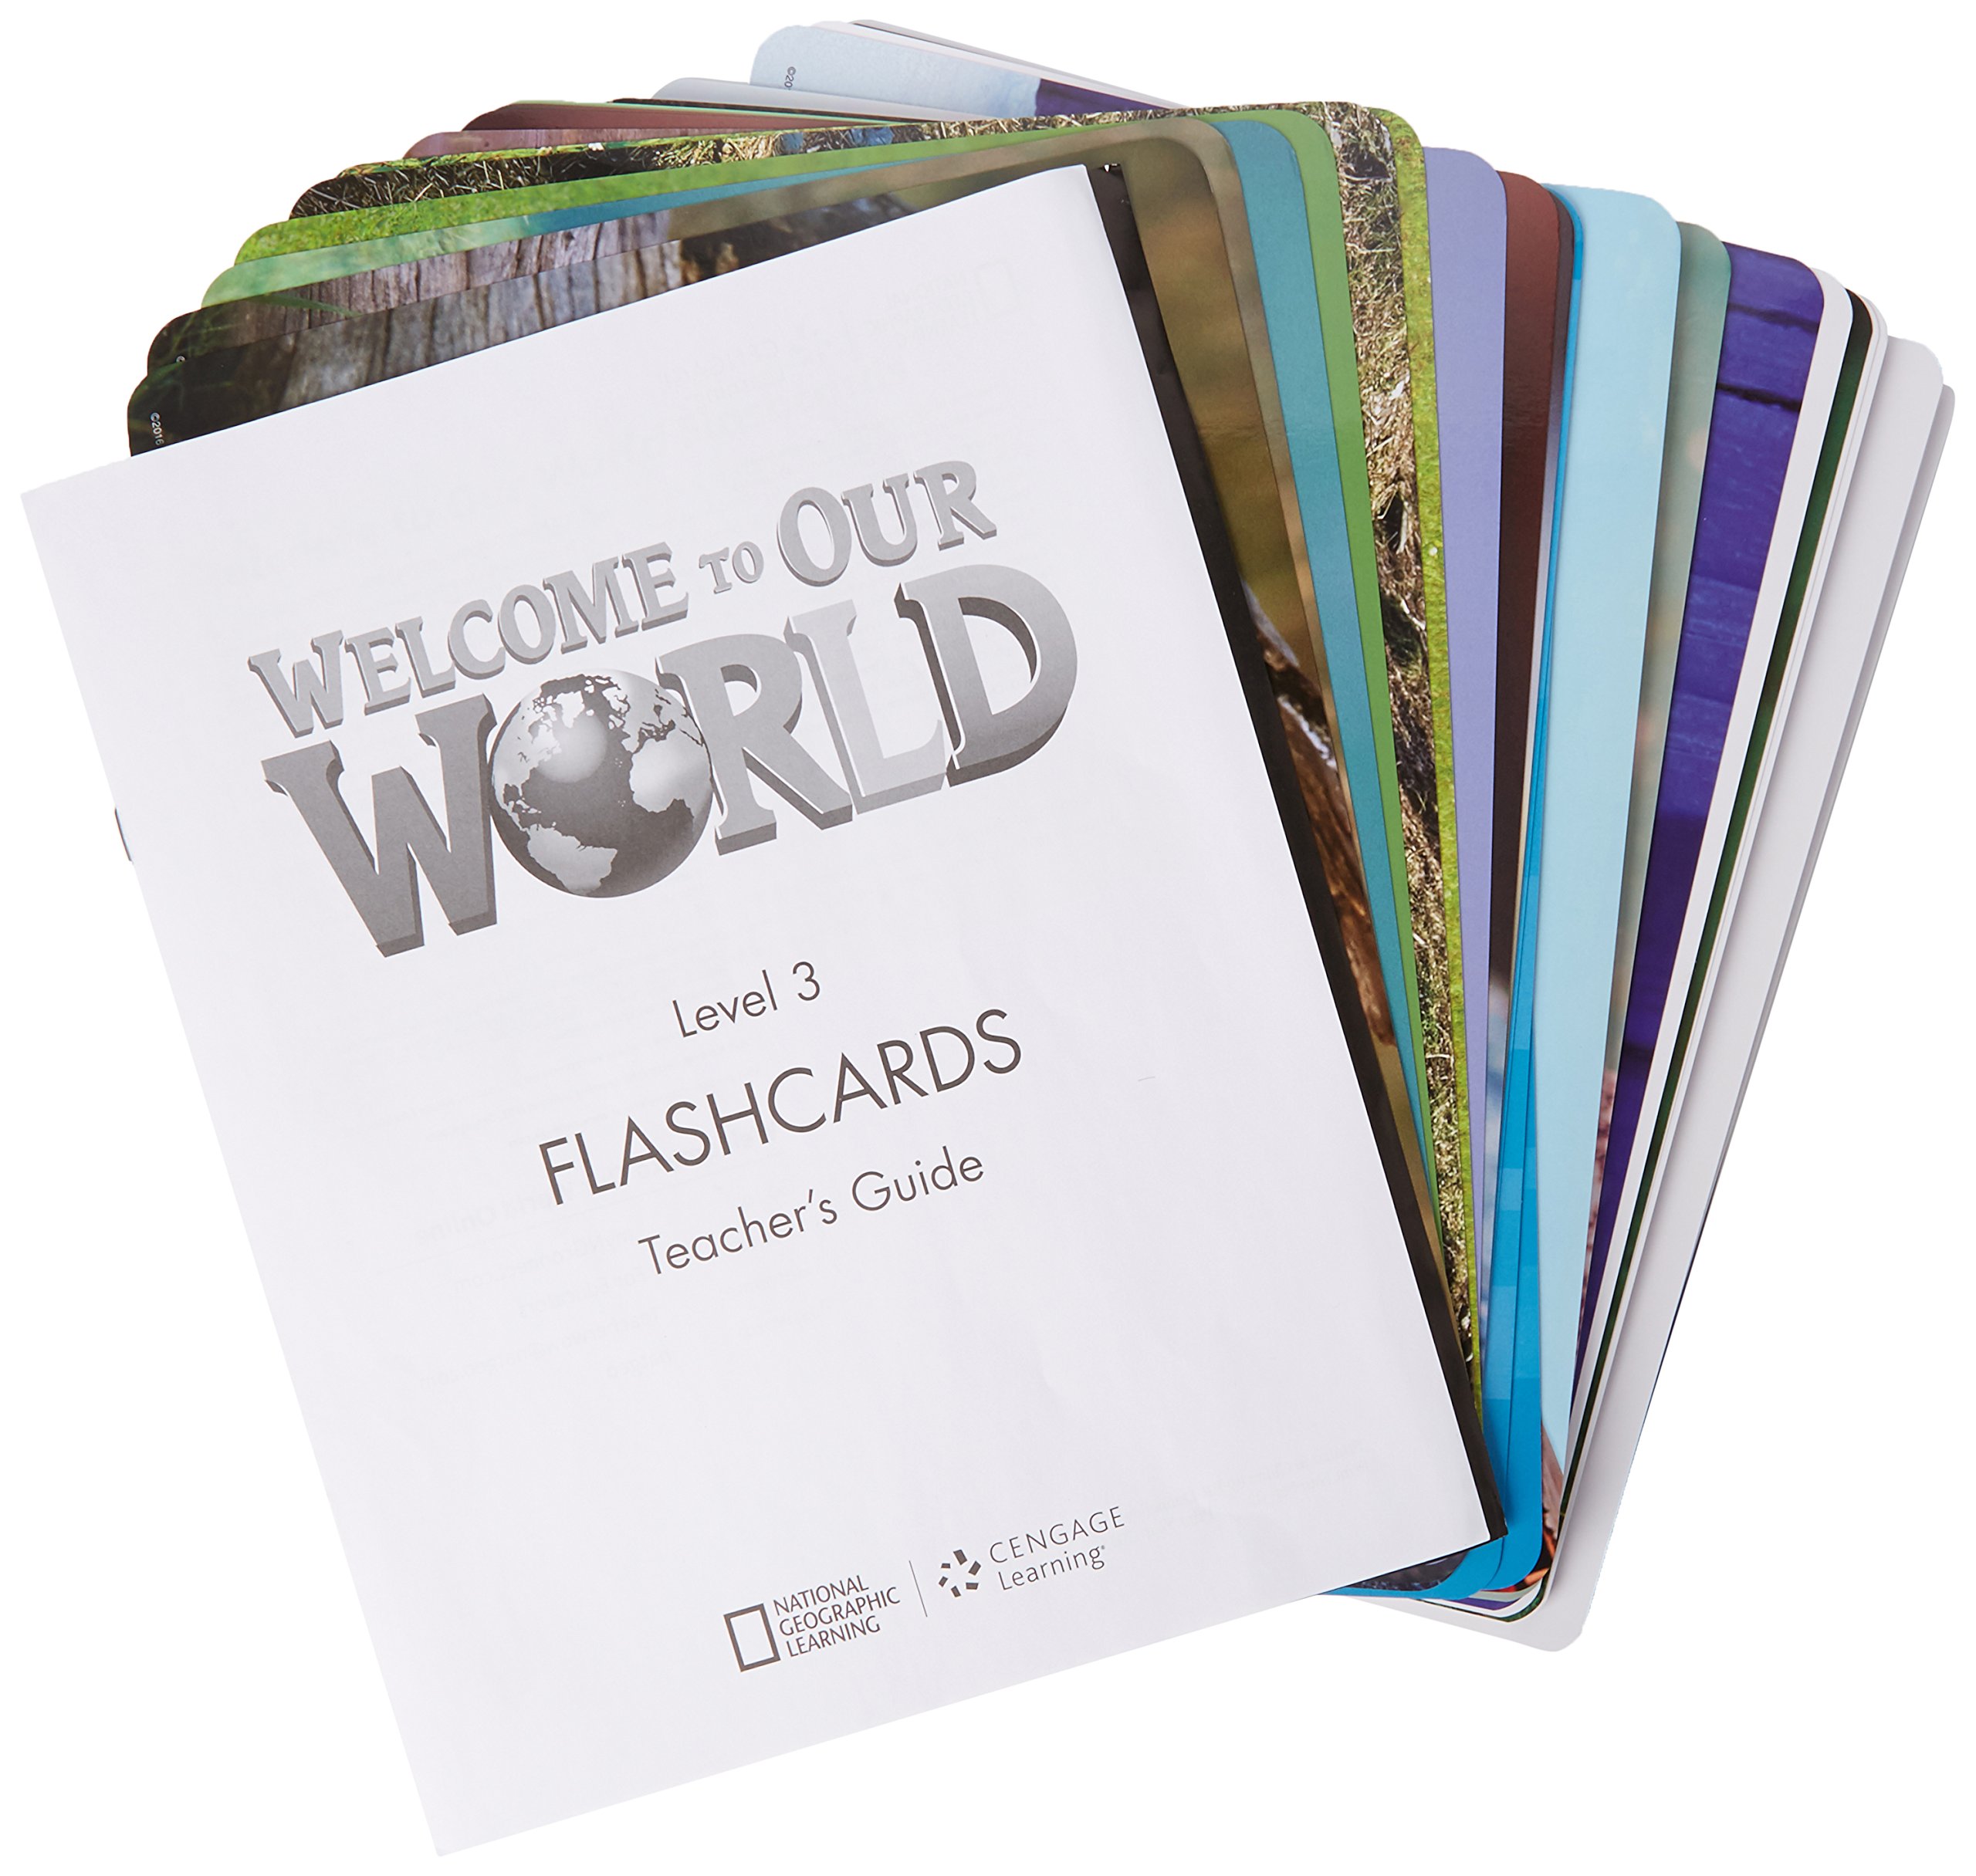 WELCOME TO OUR WORLD 3 Flashcards